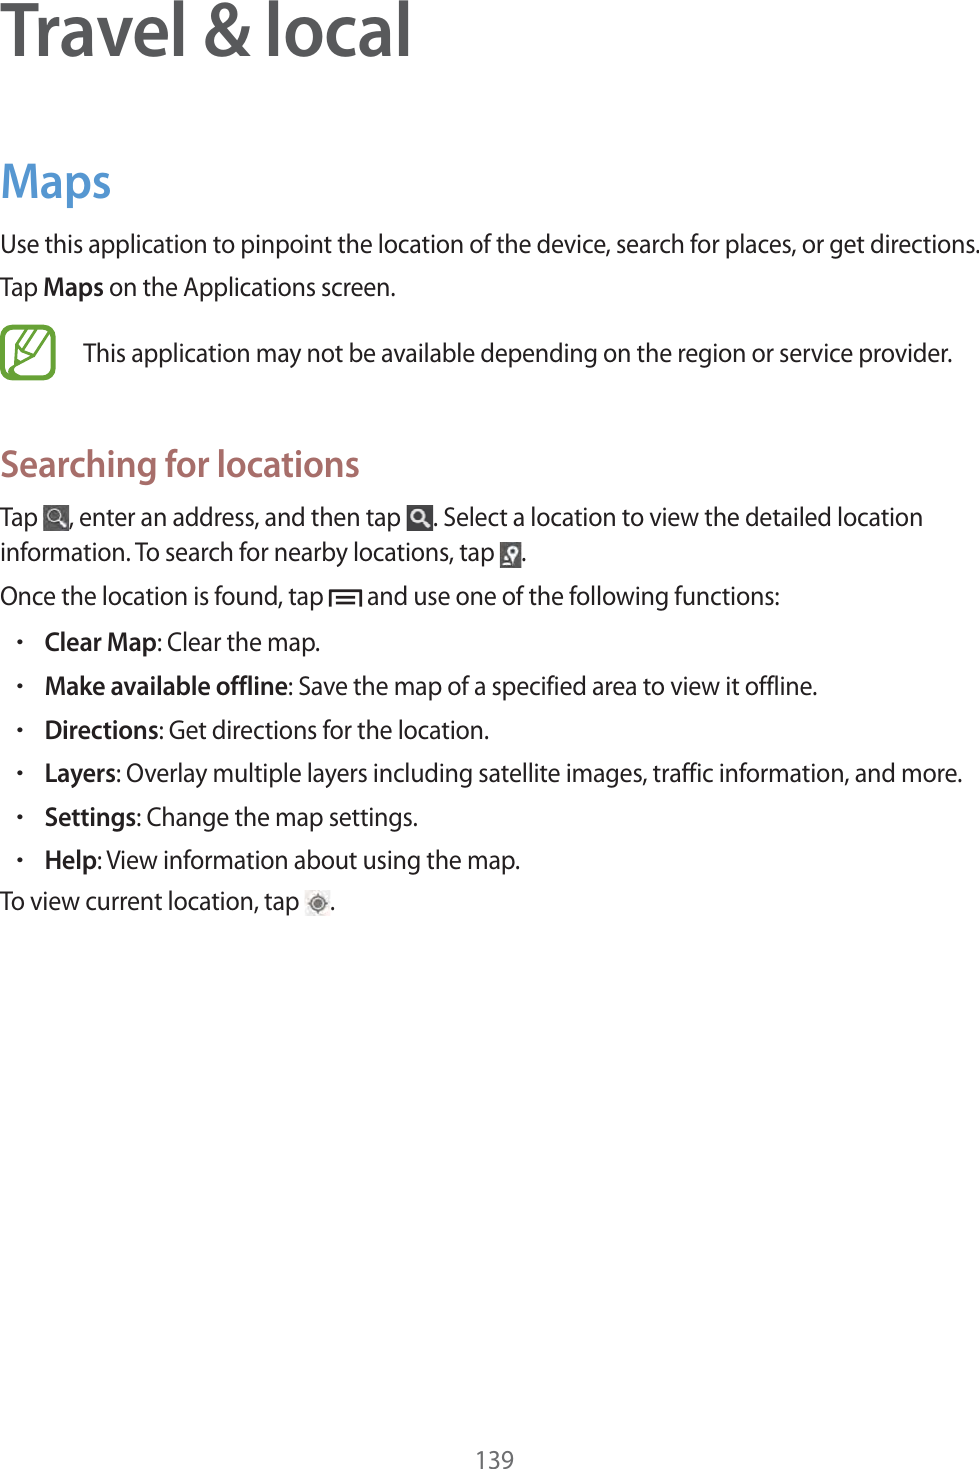 139Travel &amp; localMapsUse this application to pinpoint the location of the device, search for places, or get directions.Tap Maps on the Applications screen.This application may not be available depending on the region or service provider.Searching for locationsTap  , enter an address, and then tap  . Select a location to view the detailed location information. To search for nearby locations, tap  .Once the location is found, tap   and use one of the following functions:rClear Map: Clear the map.rMake available offline: Save the map of a specified area to view it offline.rDirections: Get directions for the location.rLayers: Overlay multiple layers including satellite images, traffic information, and more.rSettings: Change the map settings.rHelp: View information about using the map.To view current location, tap  .